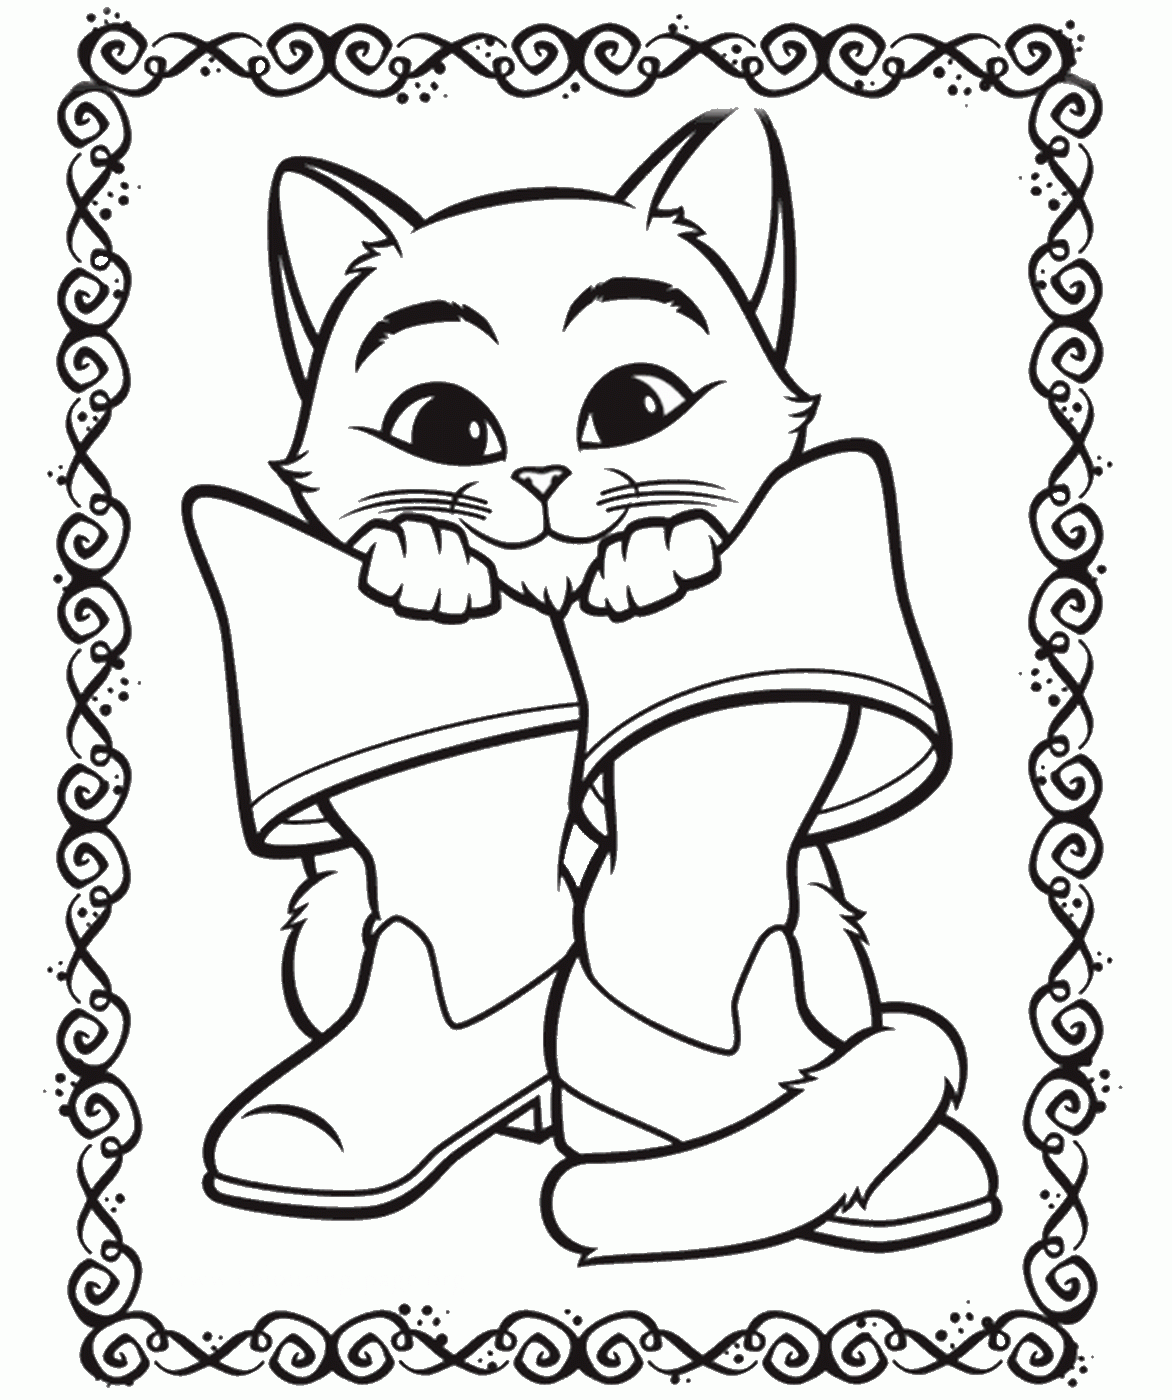 Puss in Boots Coloring Pages TV Film puss_boots_cl_34 Printable 2020 06934 Coloring4free